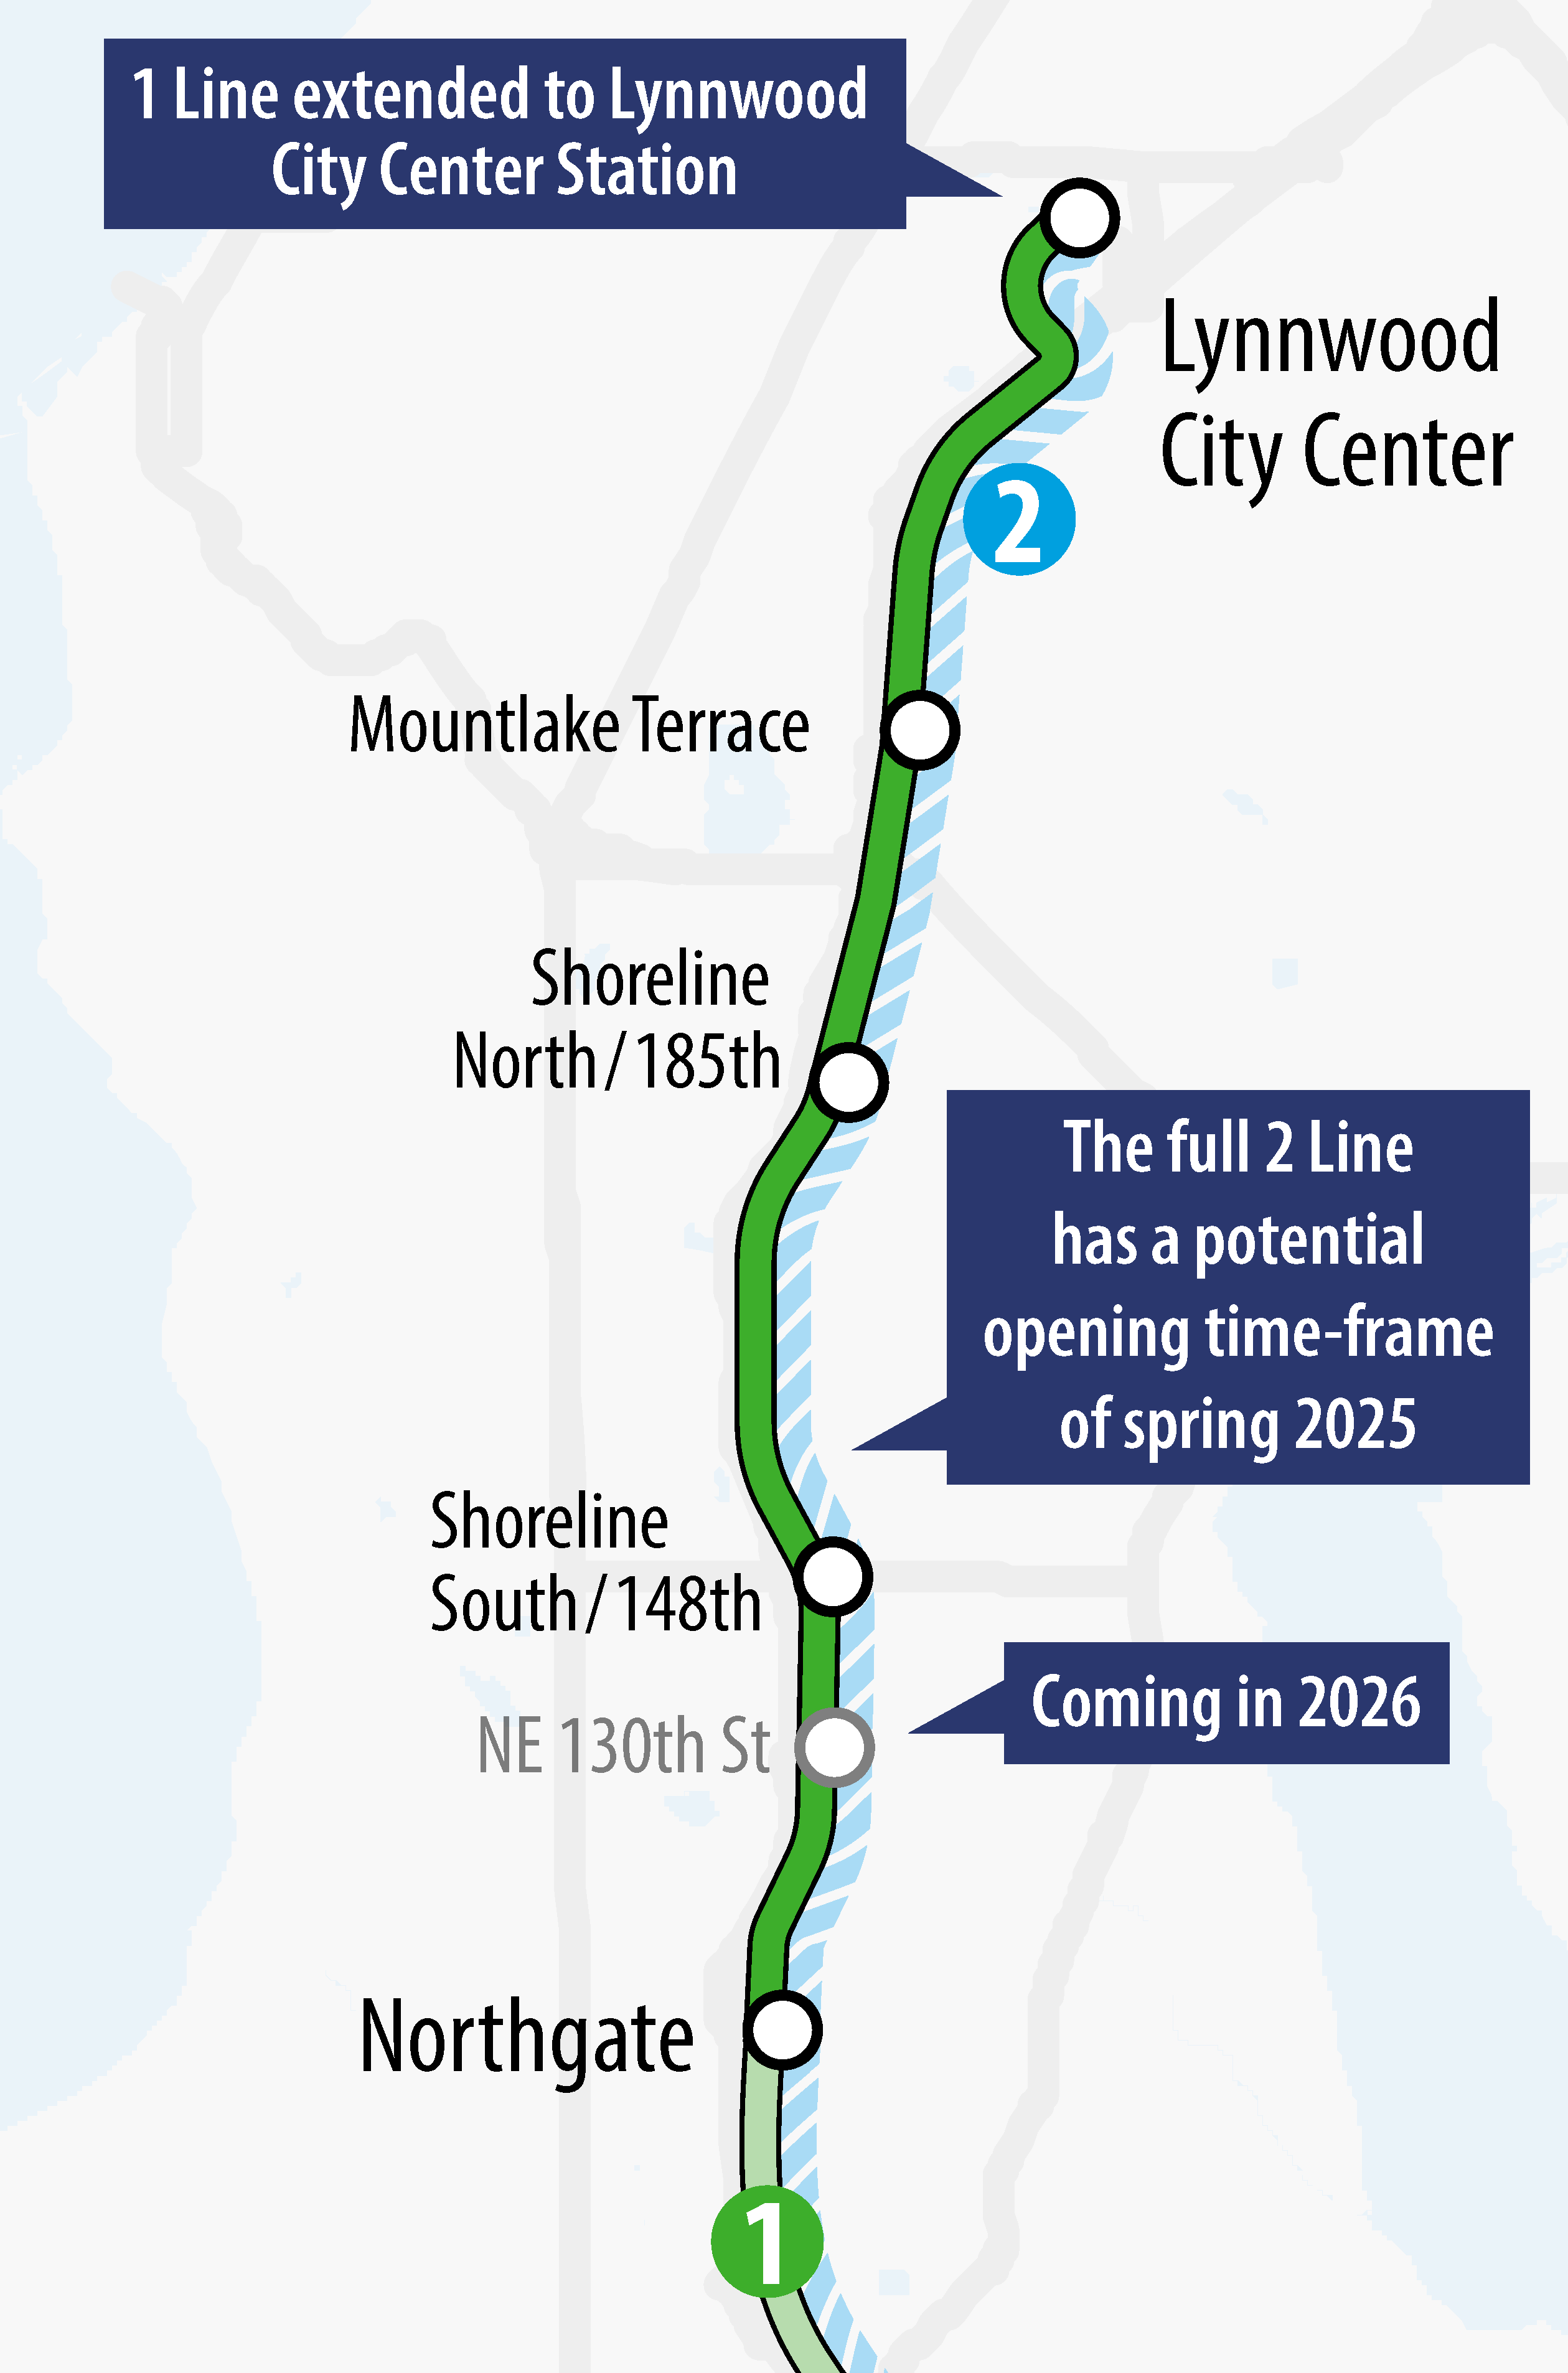 Map showing the new Link light rail stations in north Seattle and Snohomish County that are anticipated to open as early as summer or fall 2024. The depicted map shows the stations associated with the new Lynnwood Link Extension.  

 

    The Link light rail route is described as the 1 Line, which will be the route line name once other Link extension lines open in the future. The 1 Line route is depicted in green on the map, as it stretches from Lynnwood City Center in the north to Northgate Station in the south. Future stations are shown along the 1 Line with a circle, along with the station names. The future stations, from the northernmost station to the southernmost station shown in the map, are as follows: Lynnwood City Center, Mountlake Terrace, Shoreline North / 185th, Shoreline South / 148th, Northeast 130th, and Northgate Station. Please note the Northeast 130th Station is anticipated to open at a later date in 2026.  
    
     
    
    The map also depicts the future 2 Line, which will stretch from Lynnwood City Center to Redmond once fully open. The 2 Line is illustrated with a light blue dotted line. The full 2 Line potential opening timeframe is spring 2025.